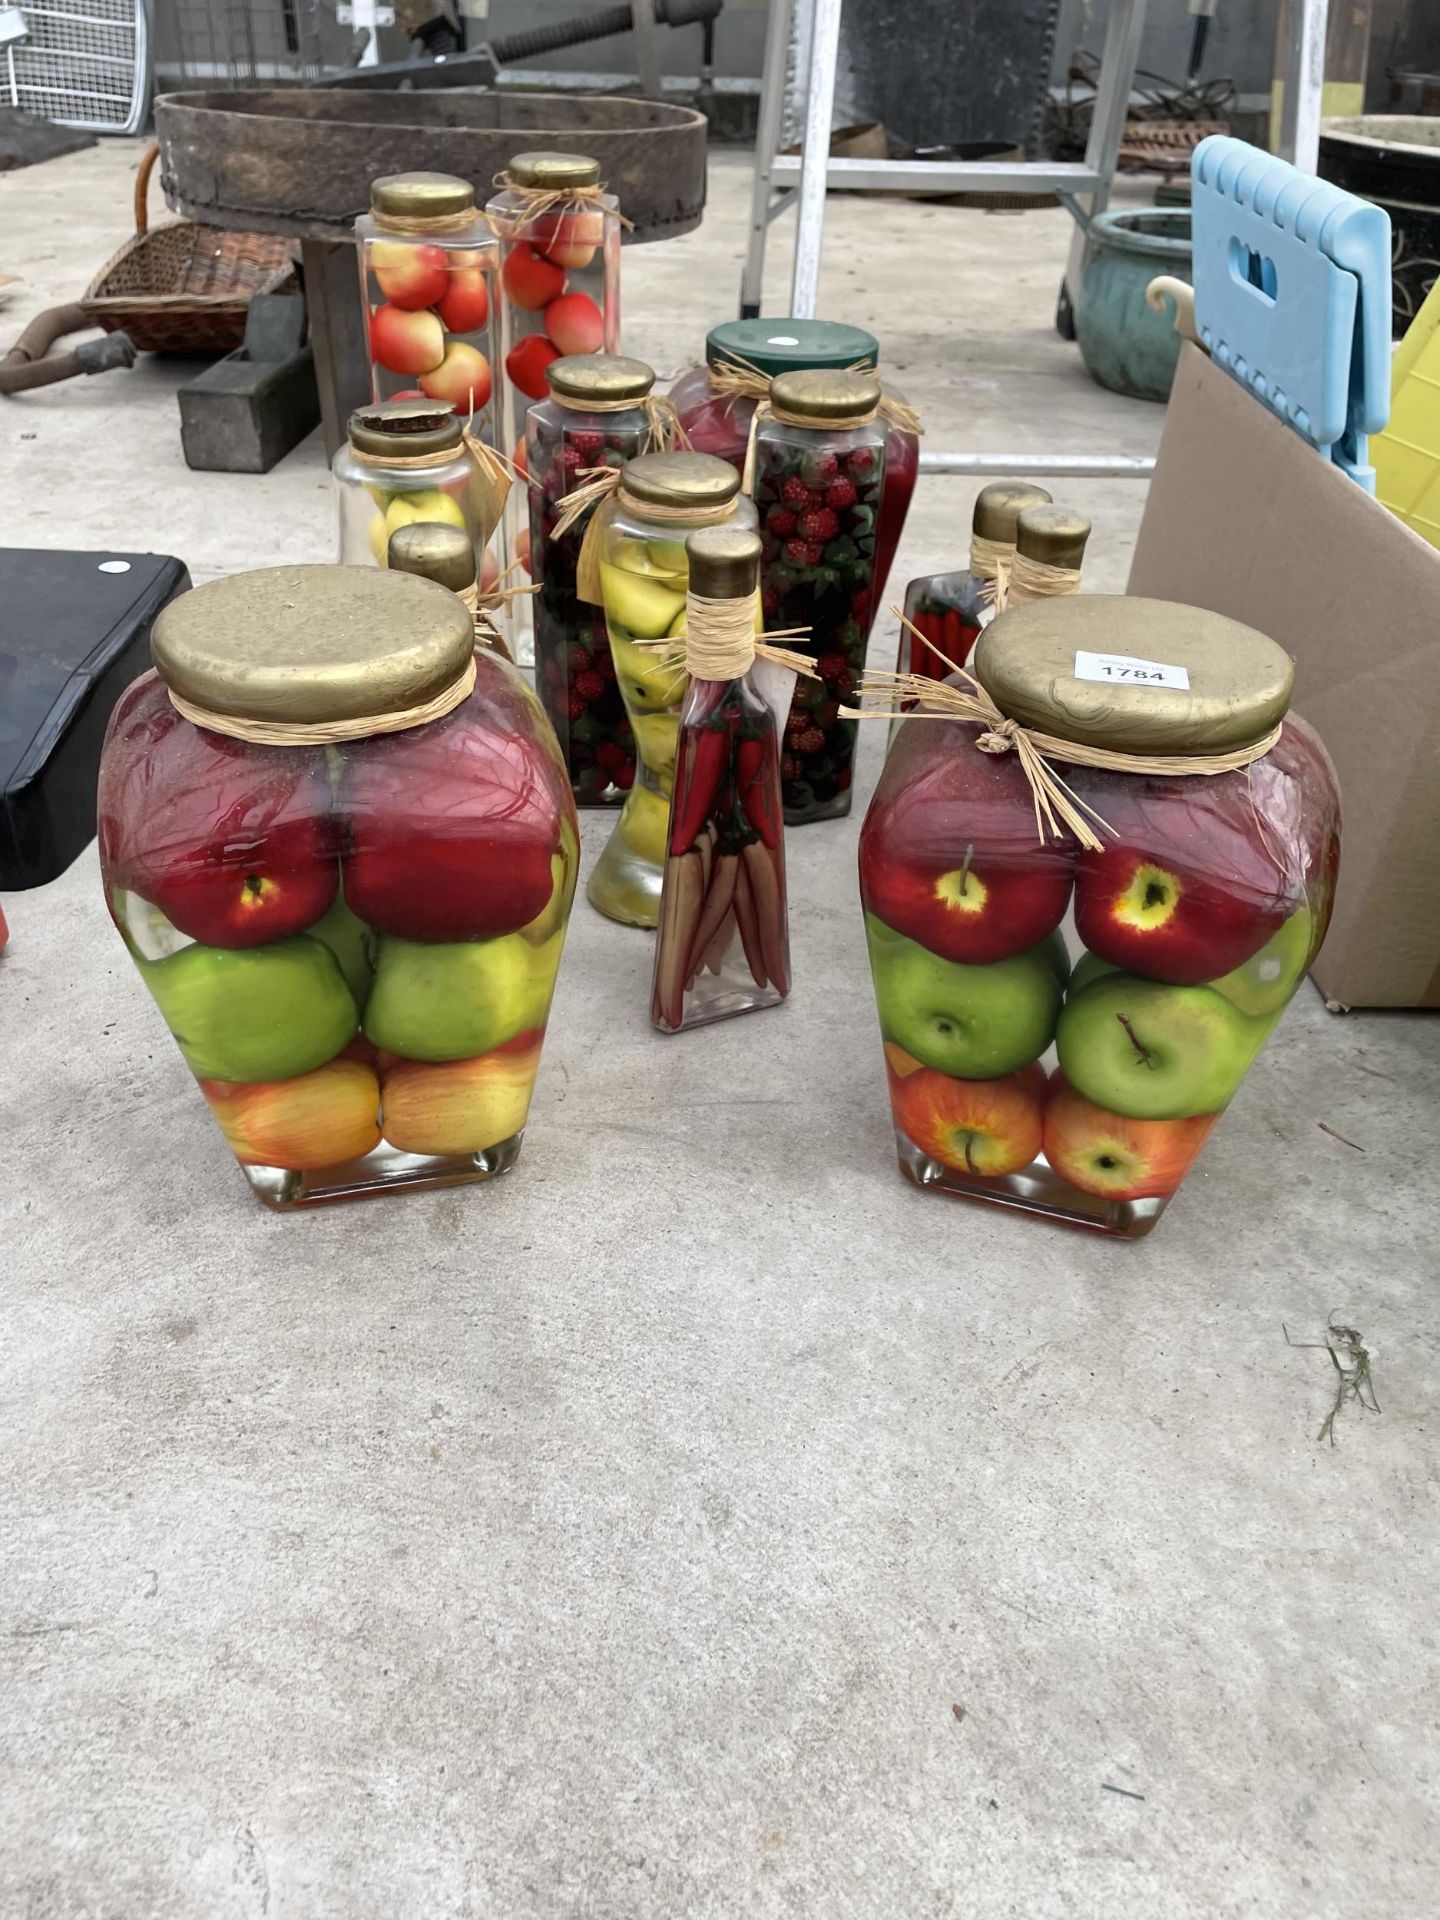 AN ASSORTMENT OF DECORATIVE STORAGE JARS CONTAINING ARTIFICIAL FRUIT - Image 2 of 6